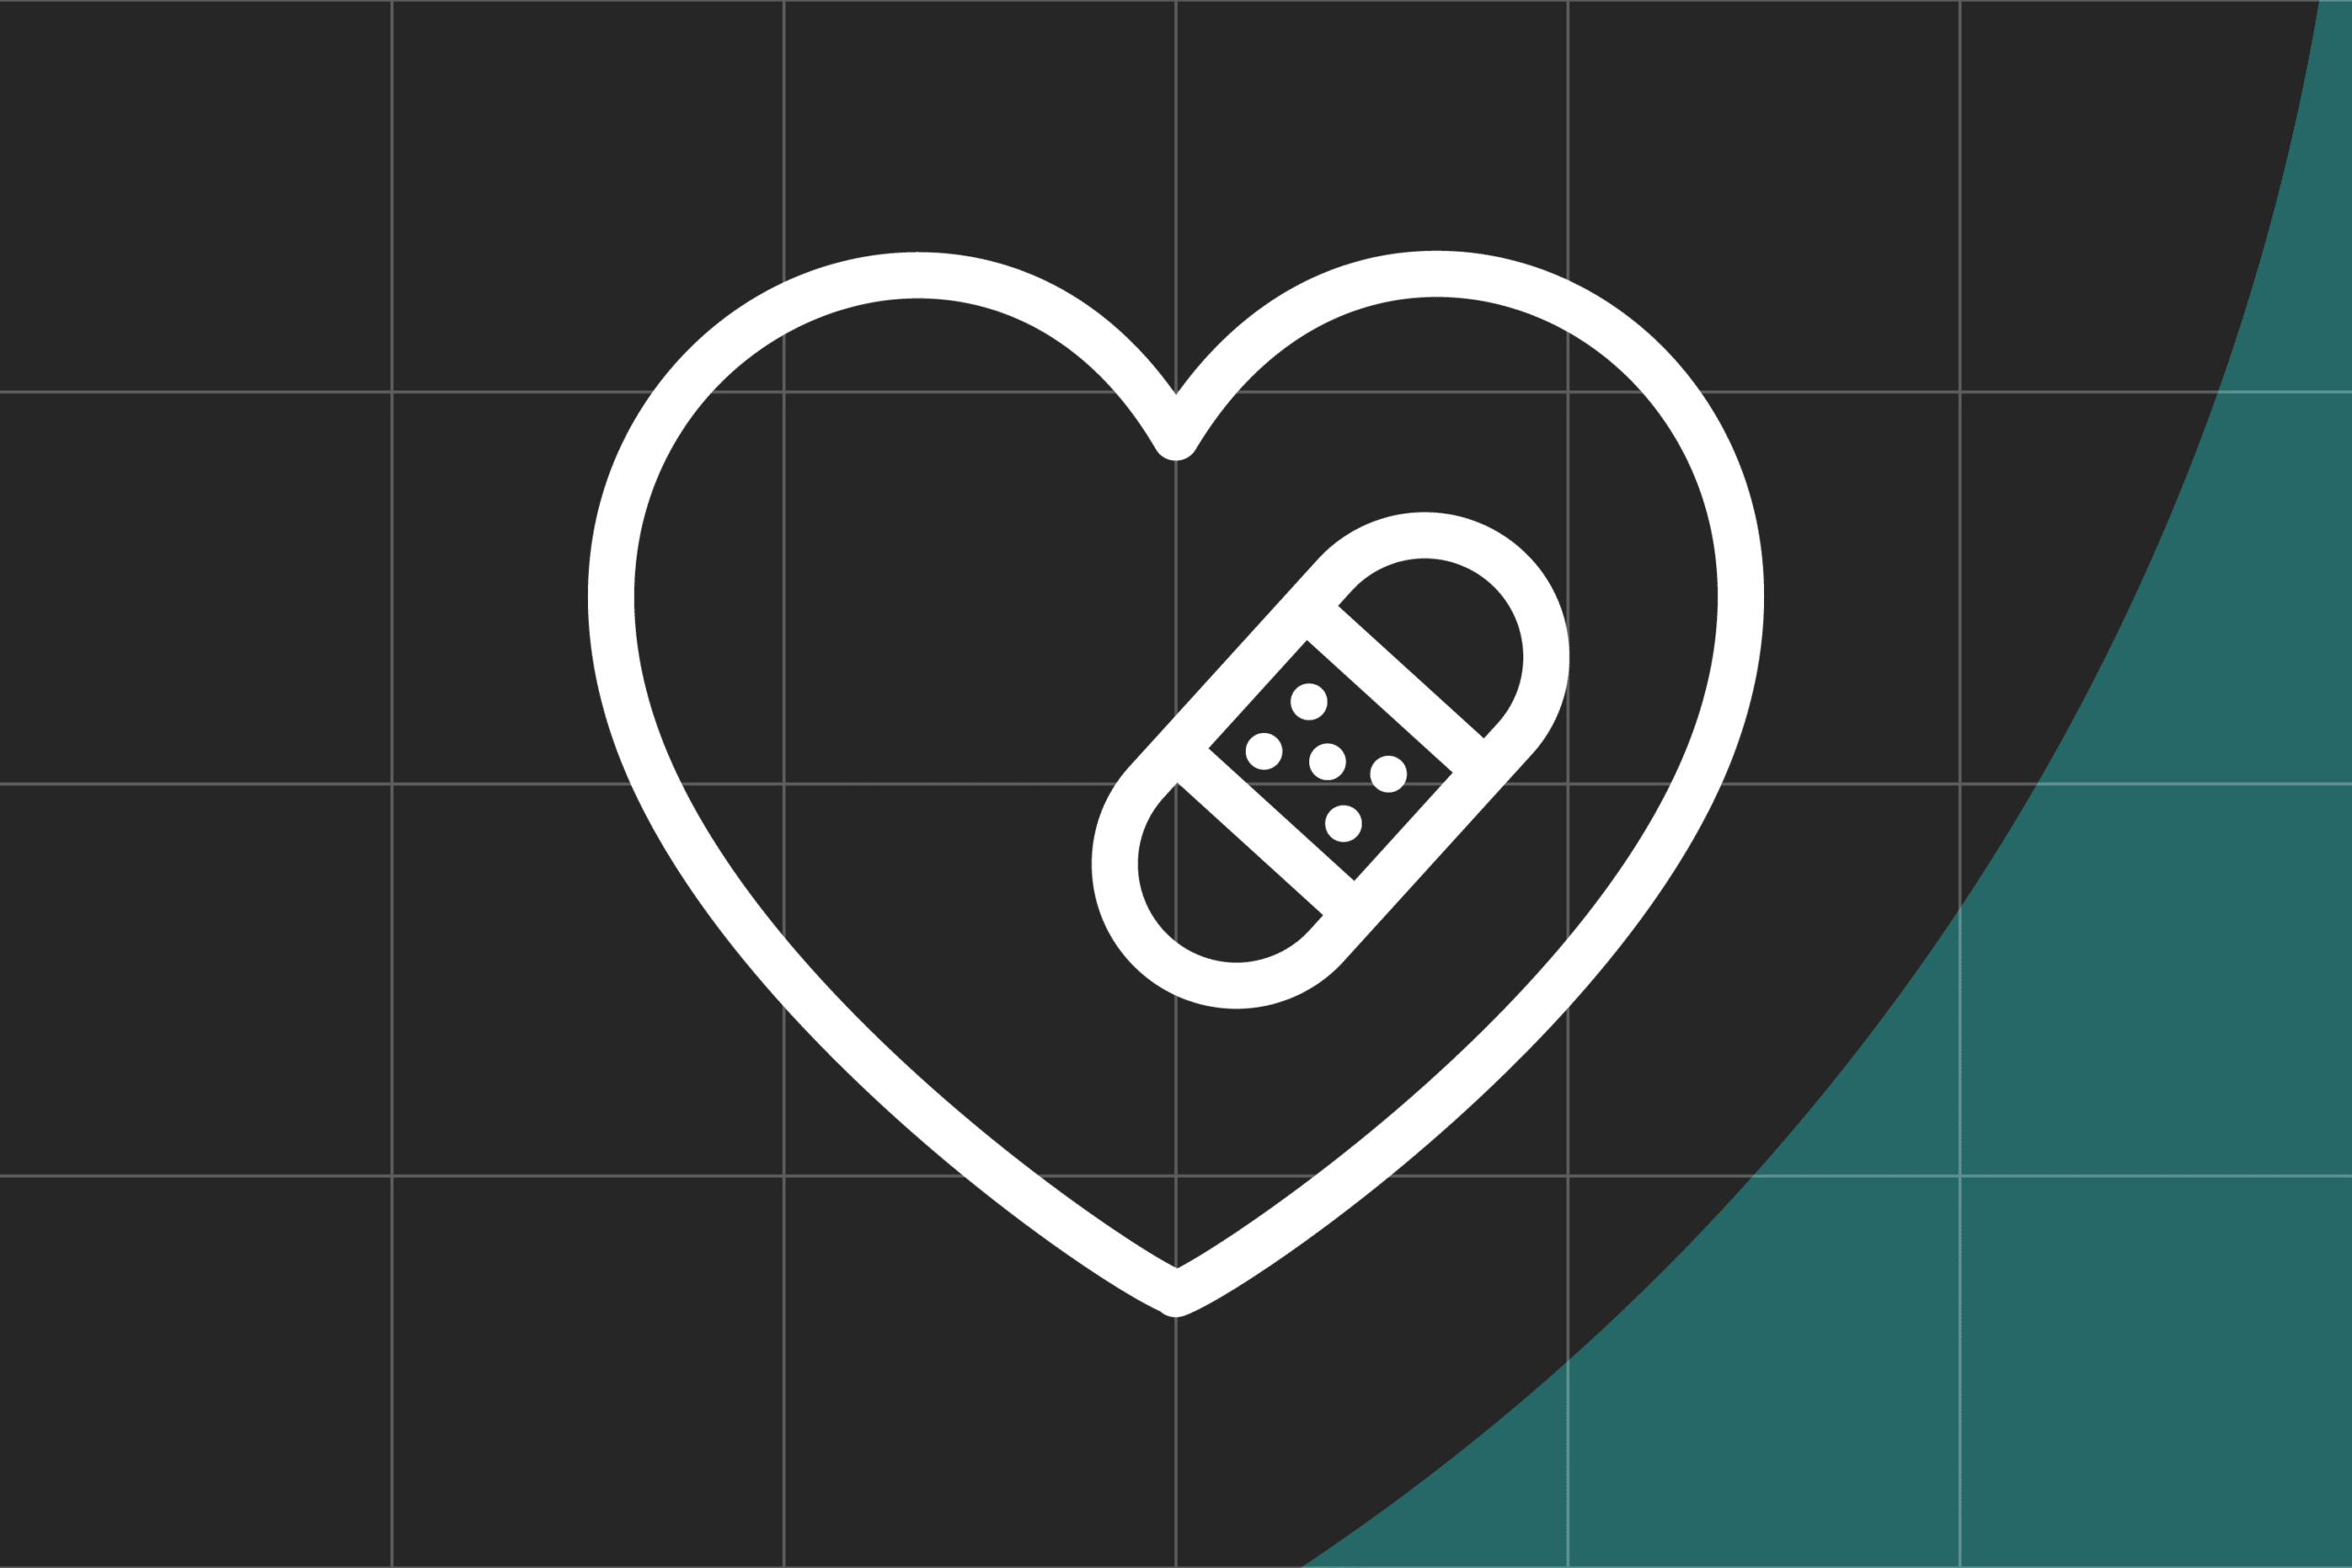 podcast cover art: heart with bandage